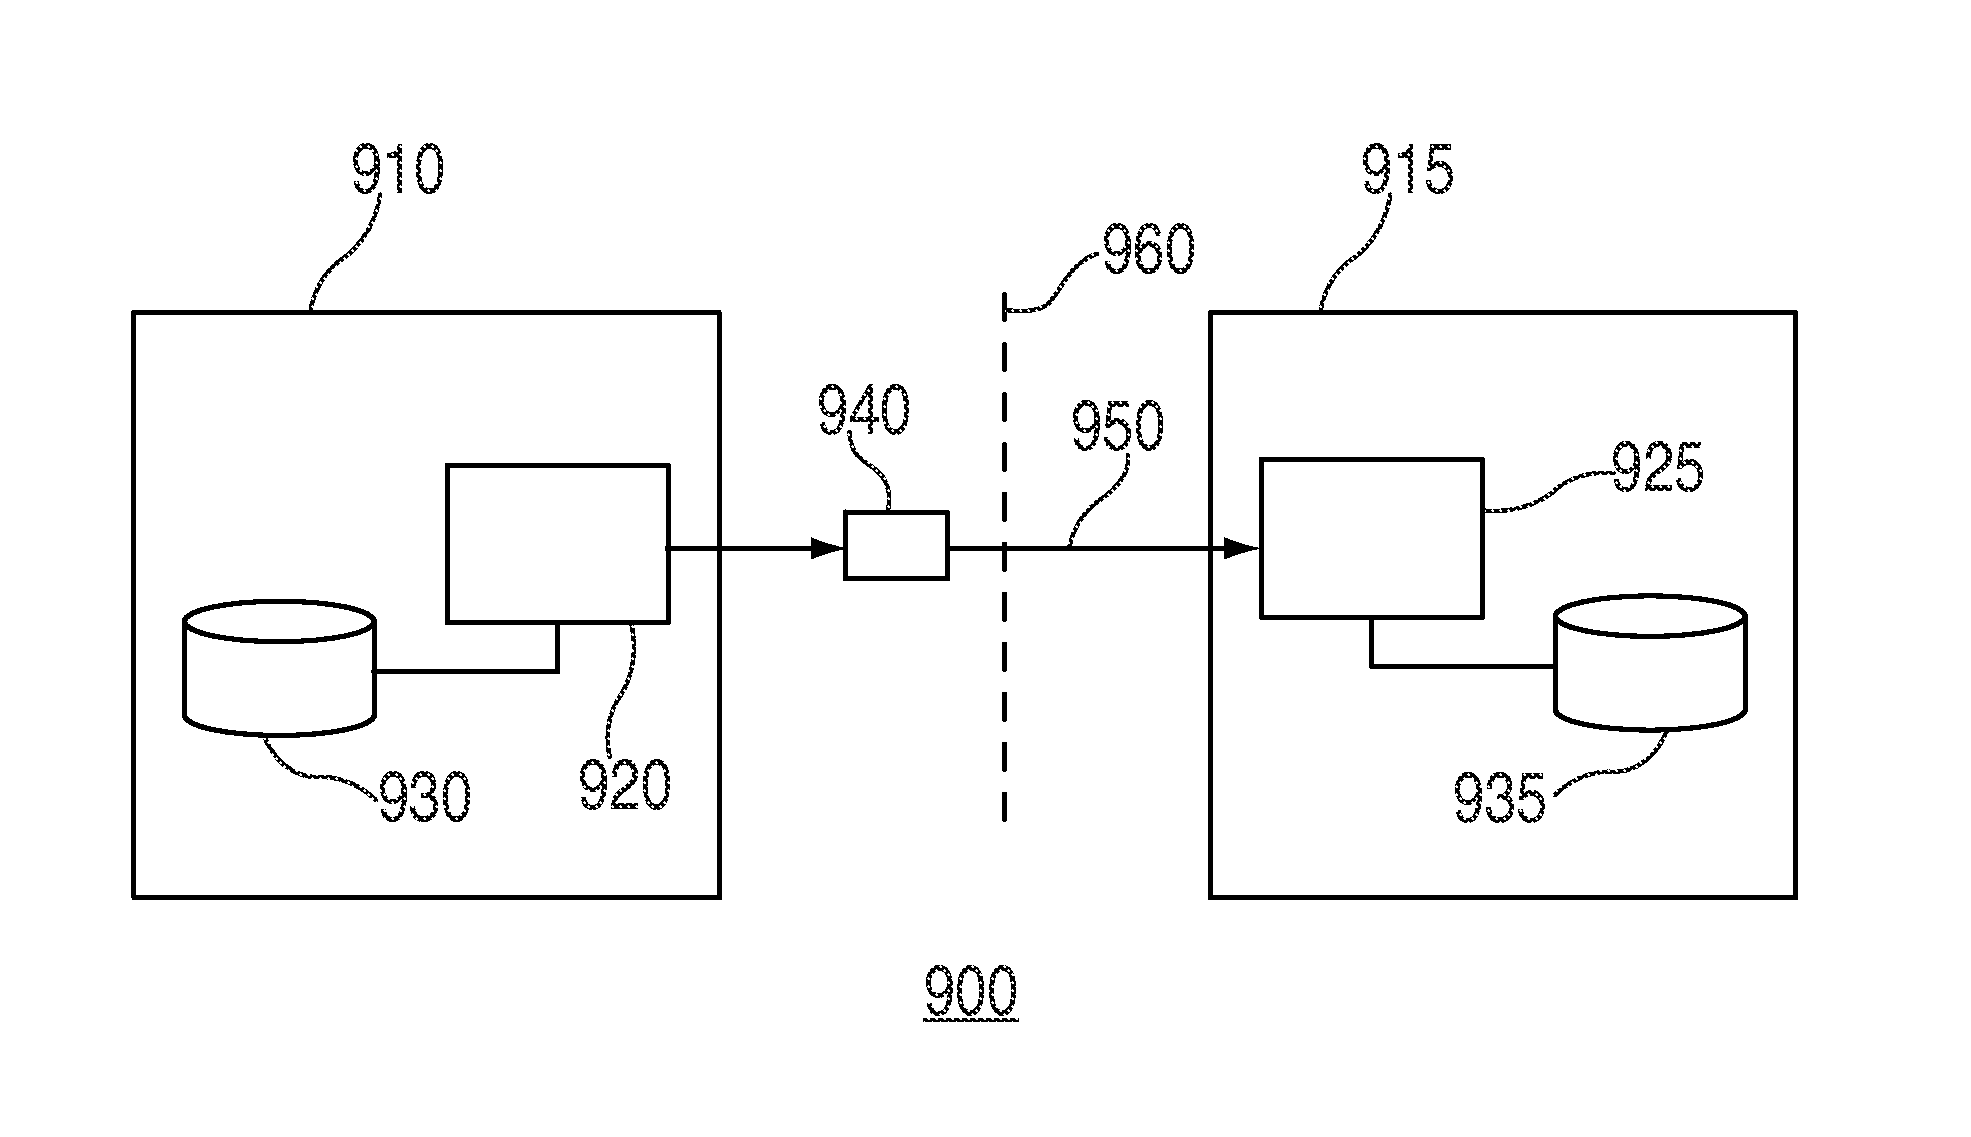 Method and system for processing a file to identify unexpected file types